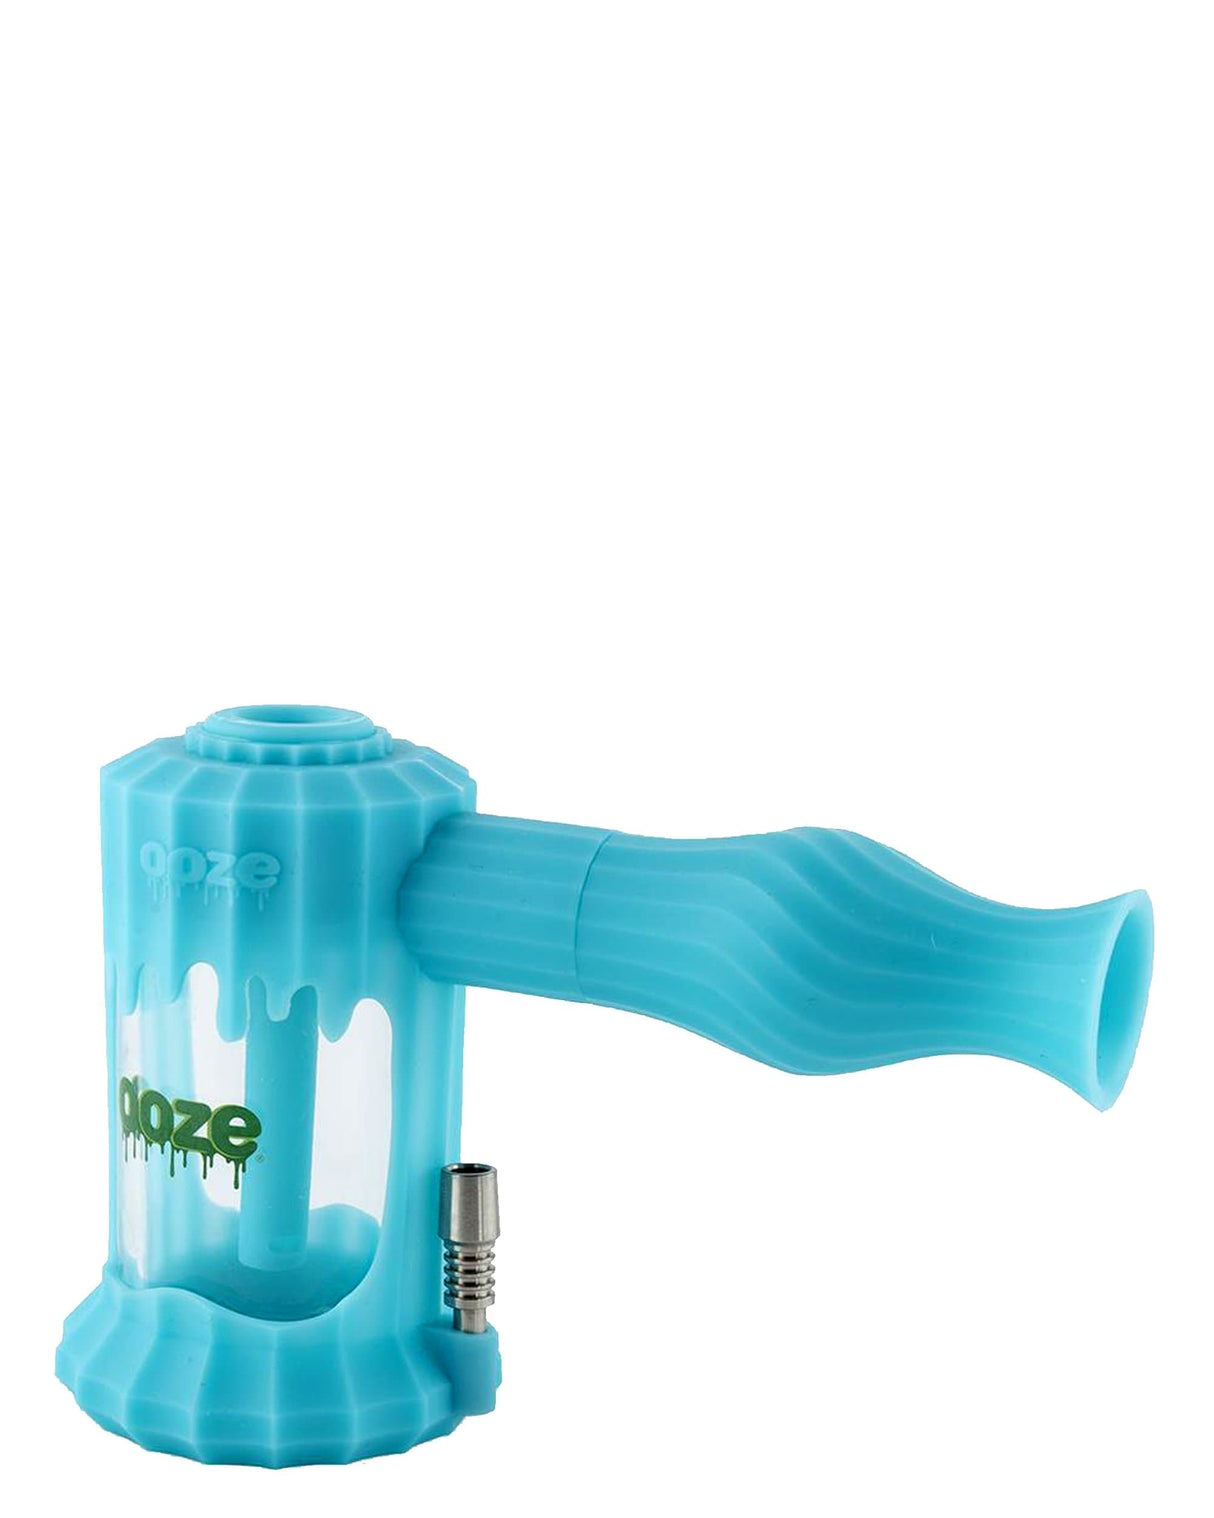 Ooze Clobb 4-in-1 Silicone Pipe in Teal, Side View, for Dry Herbs & Concentrates